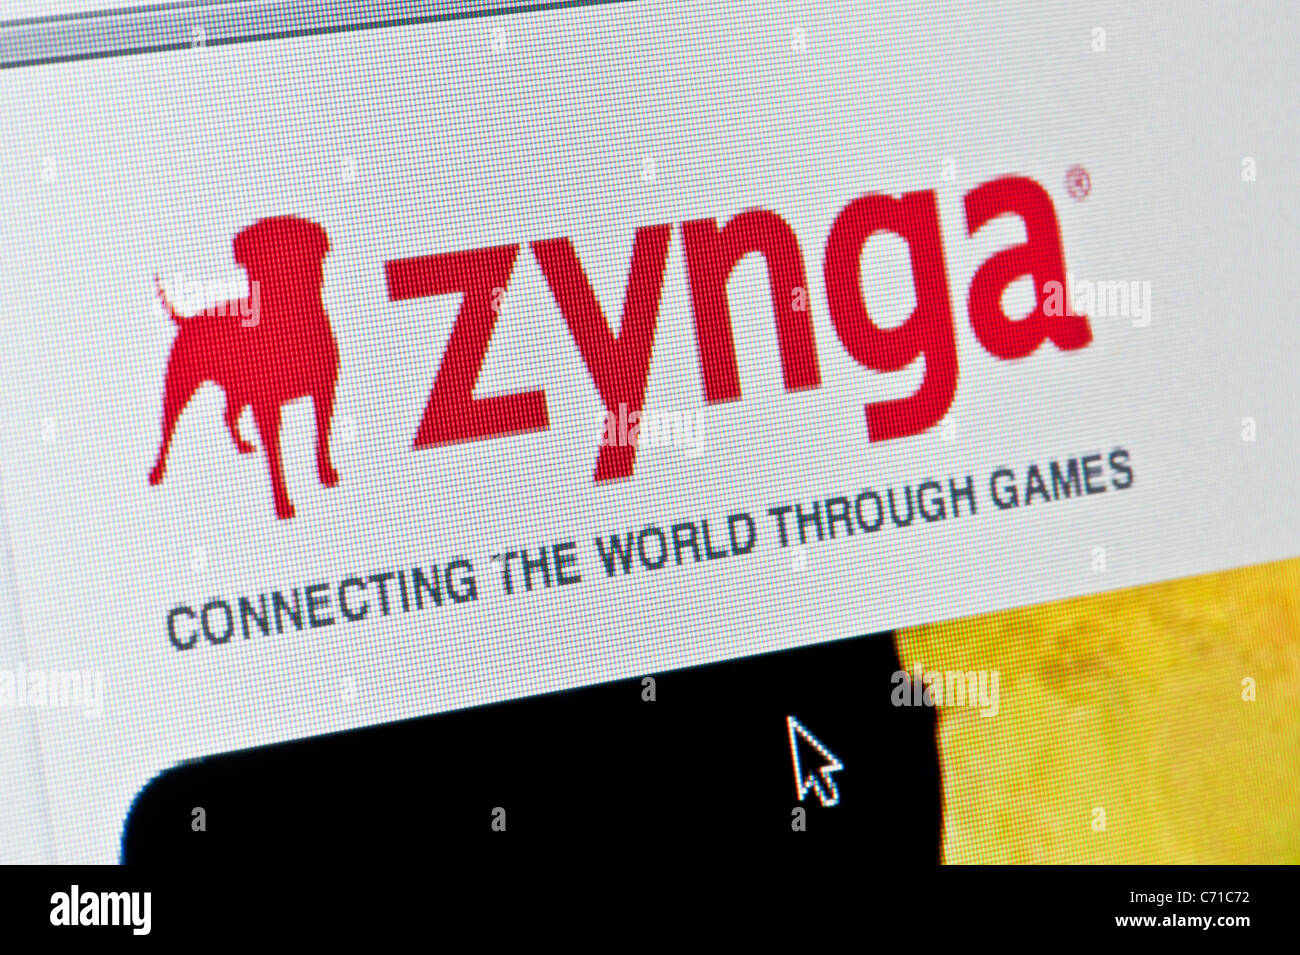 Close up of the Zynga logo as seen on its website. (Editorial use only: print, TV, e-book and editorial website). Stock Photo